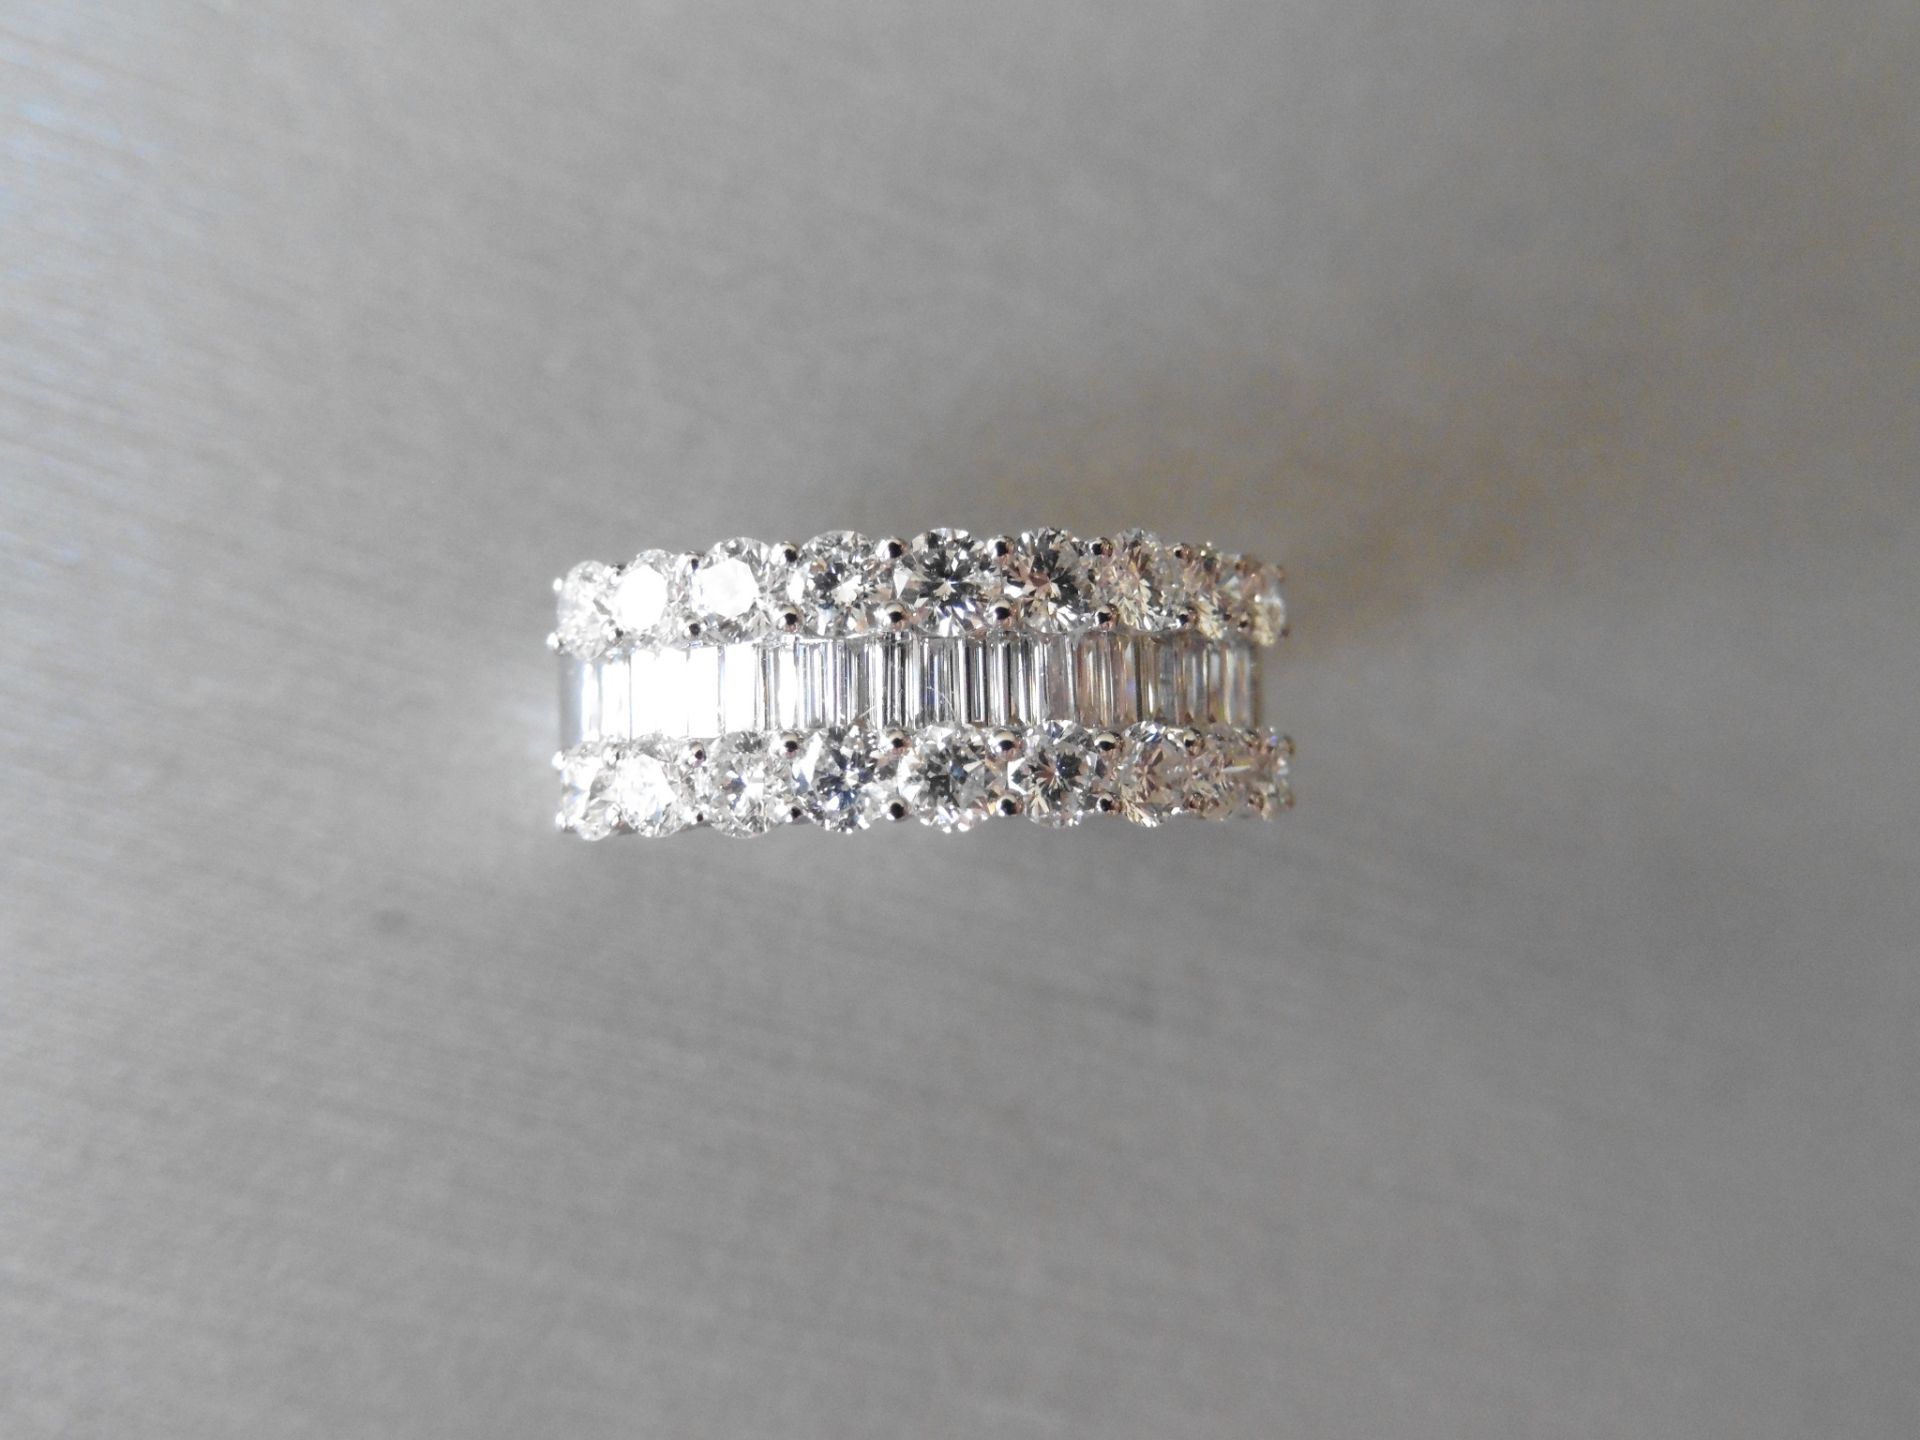 18ct white gold diamond band dress ring. Set with 3 rows of diamonds, 2 rows of brilliant cut - Image 2 of 4